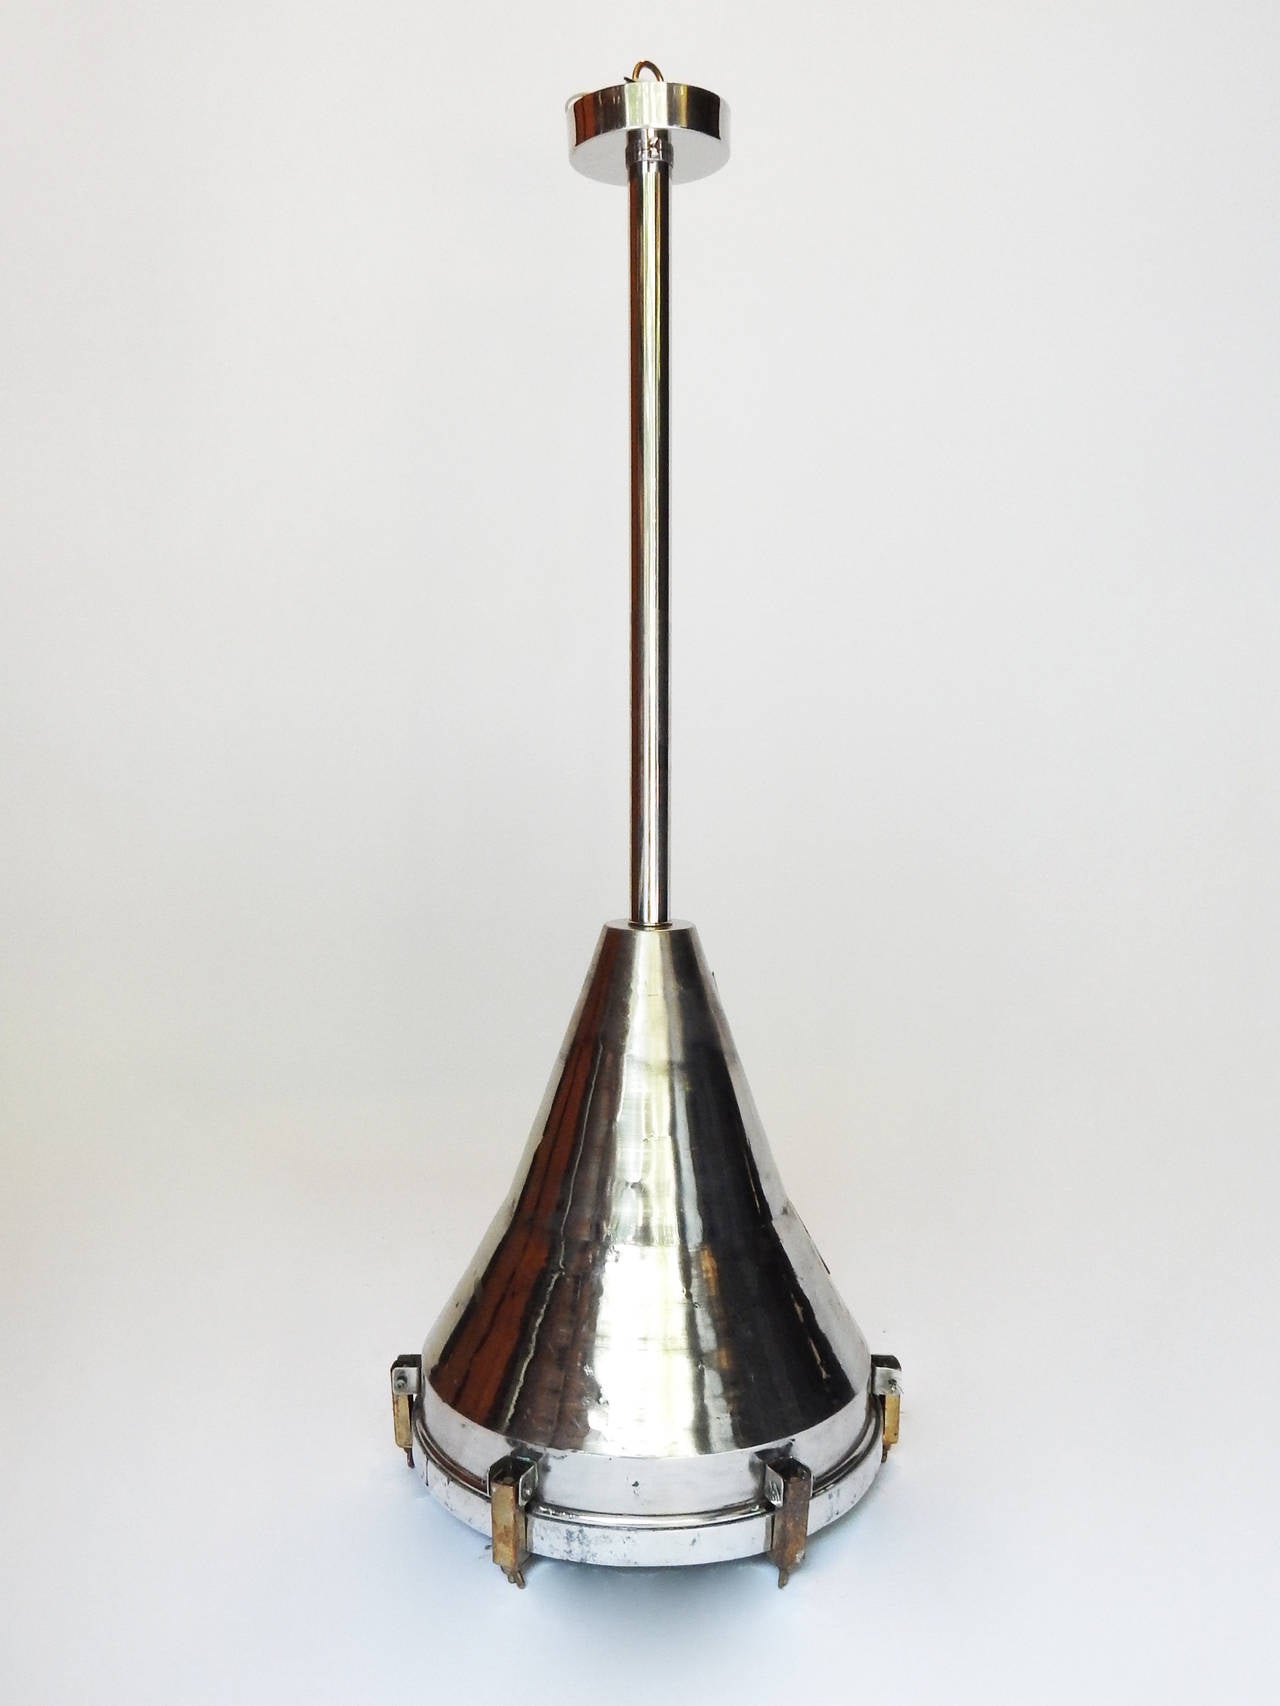 Pair of Industrial chrome lamps with new wiring, stems and canopy.
Height listed includes the length of pole which can be cut (or lengthened) to specifications. Cone only is 22 inches high.